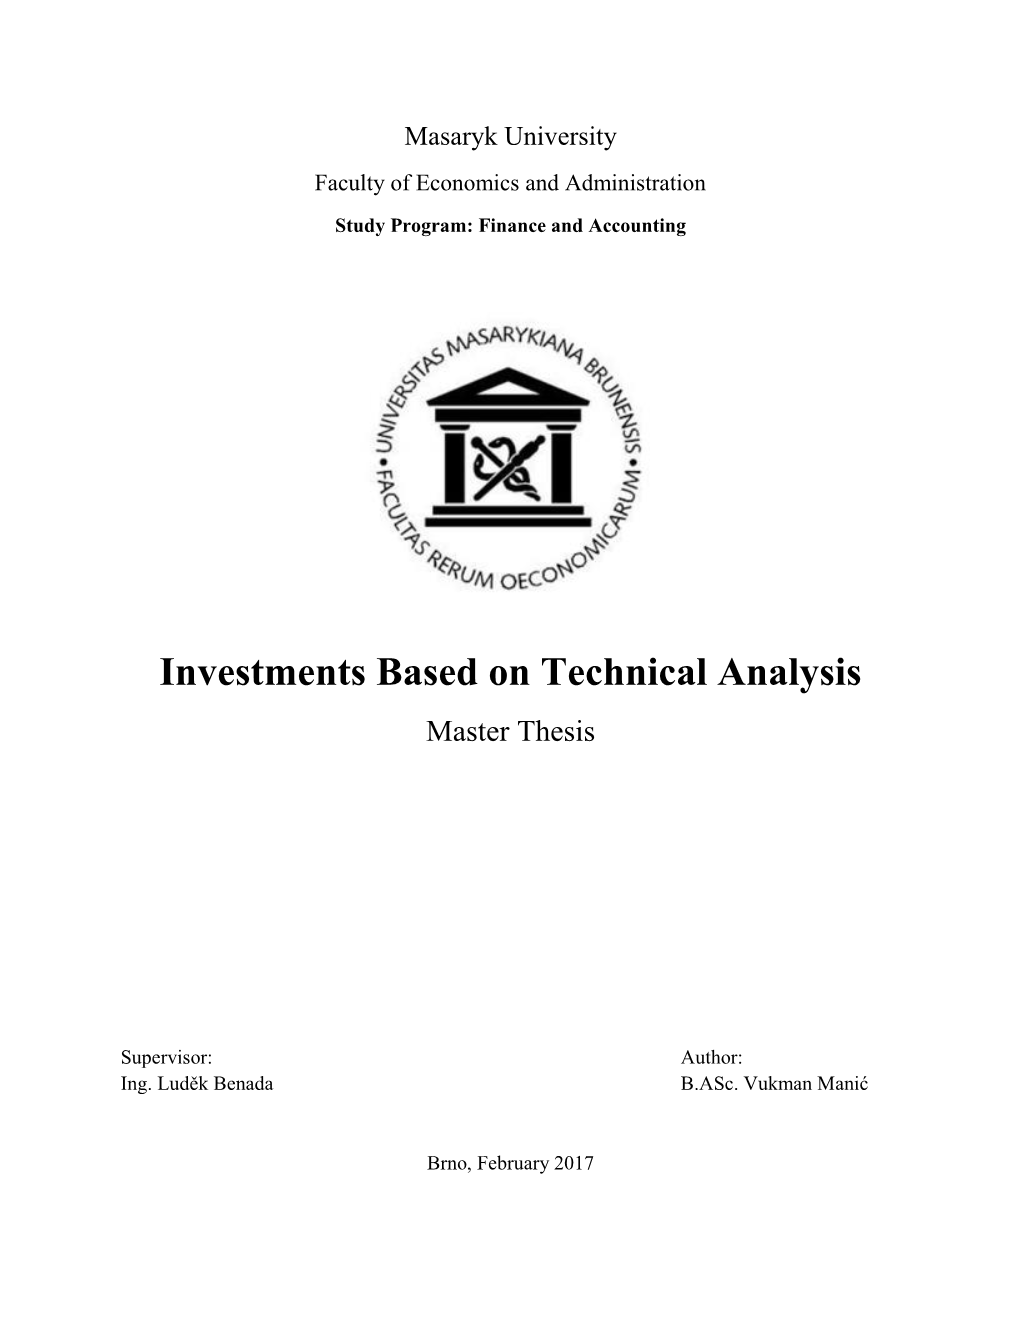 Investments Based on Technical Analysis Master Thesis